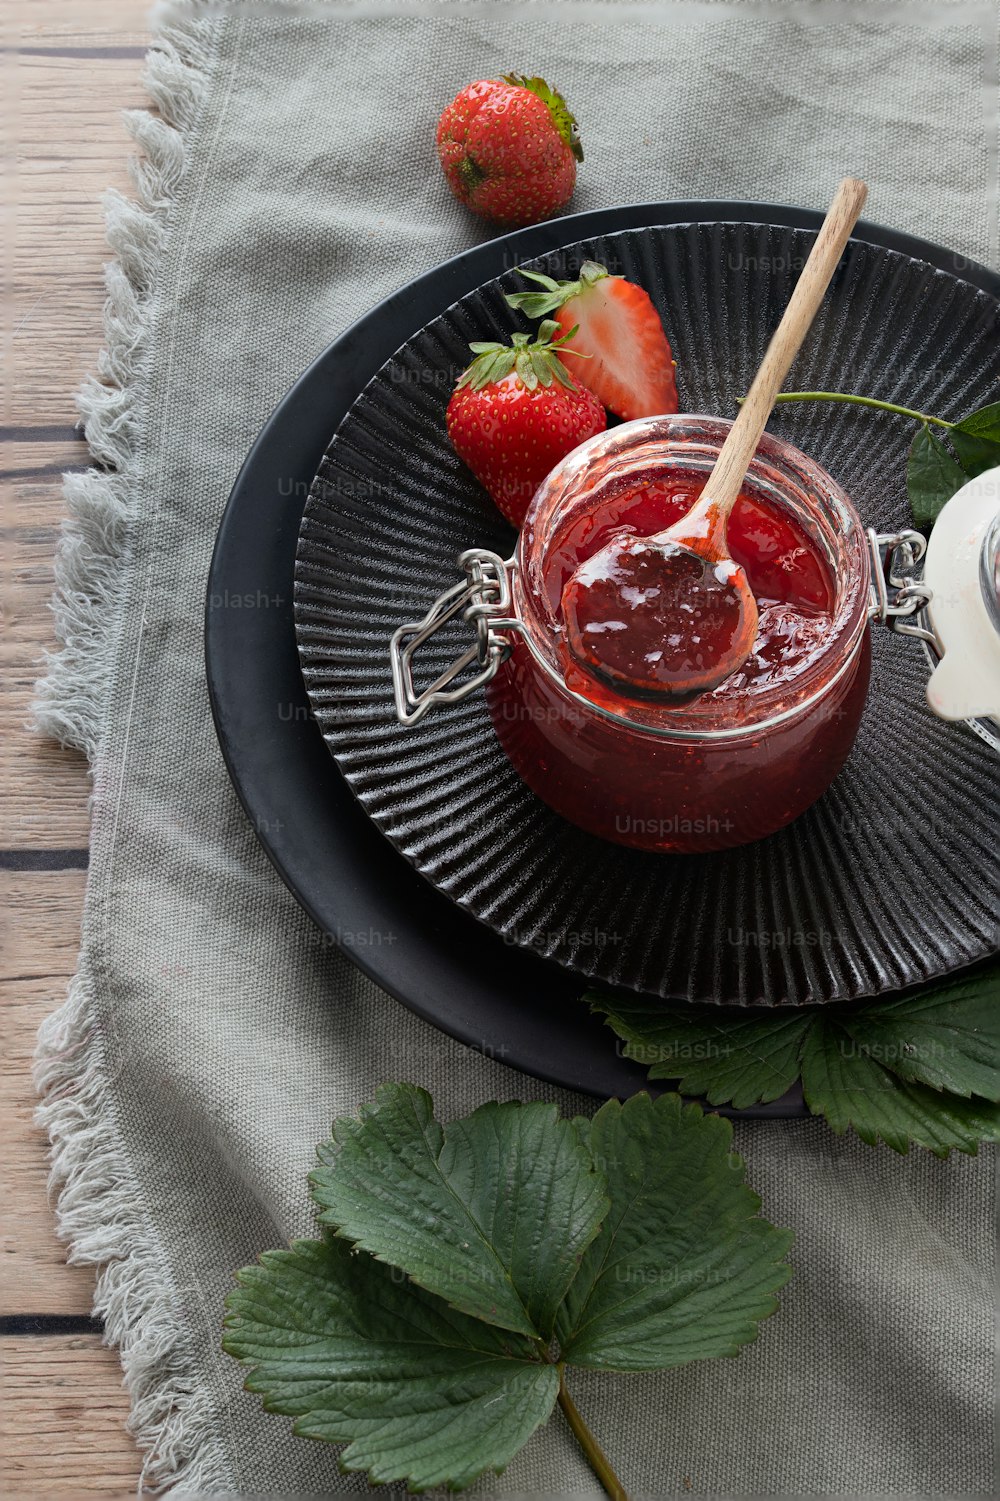 a plate with a jar of strawberry jam and two strawberries